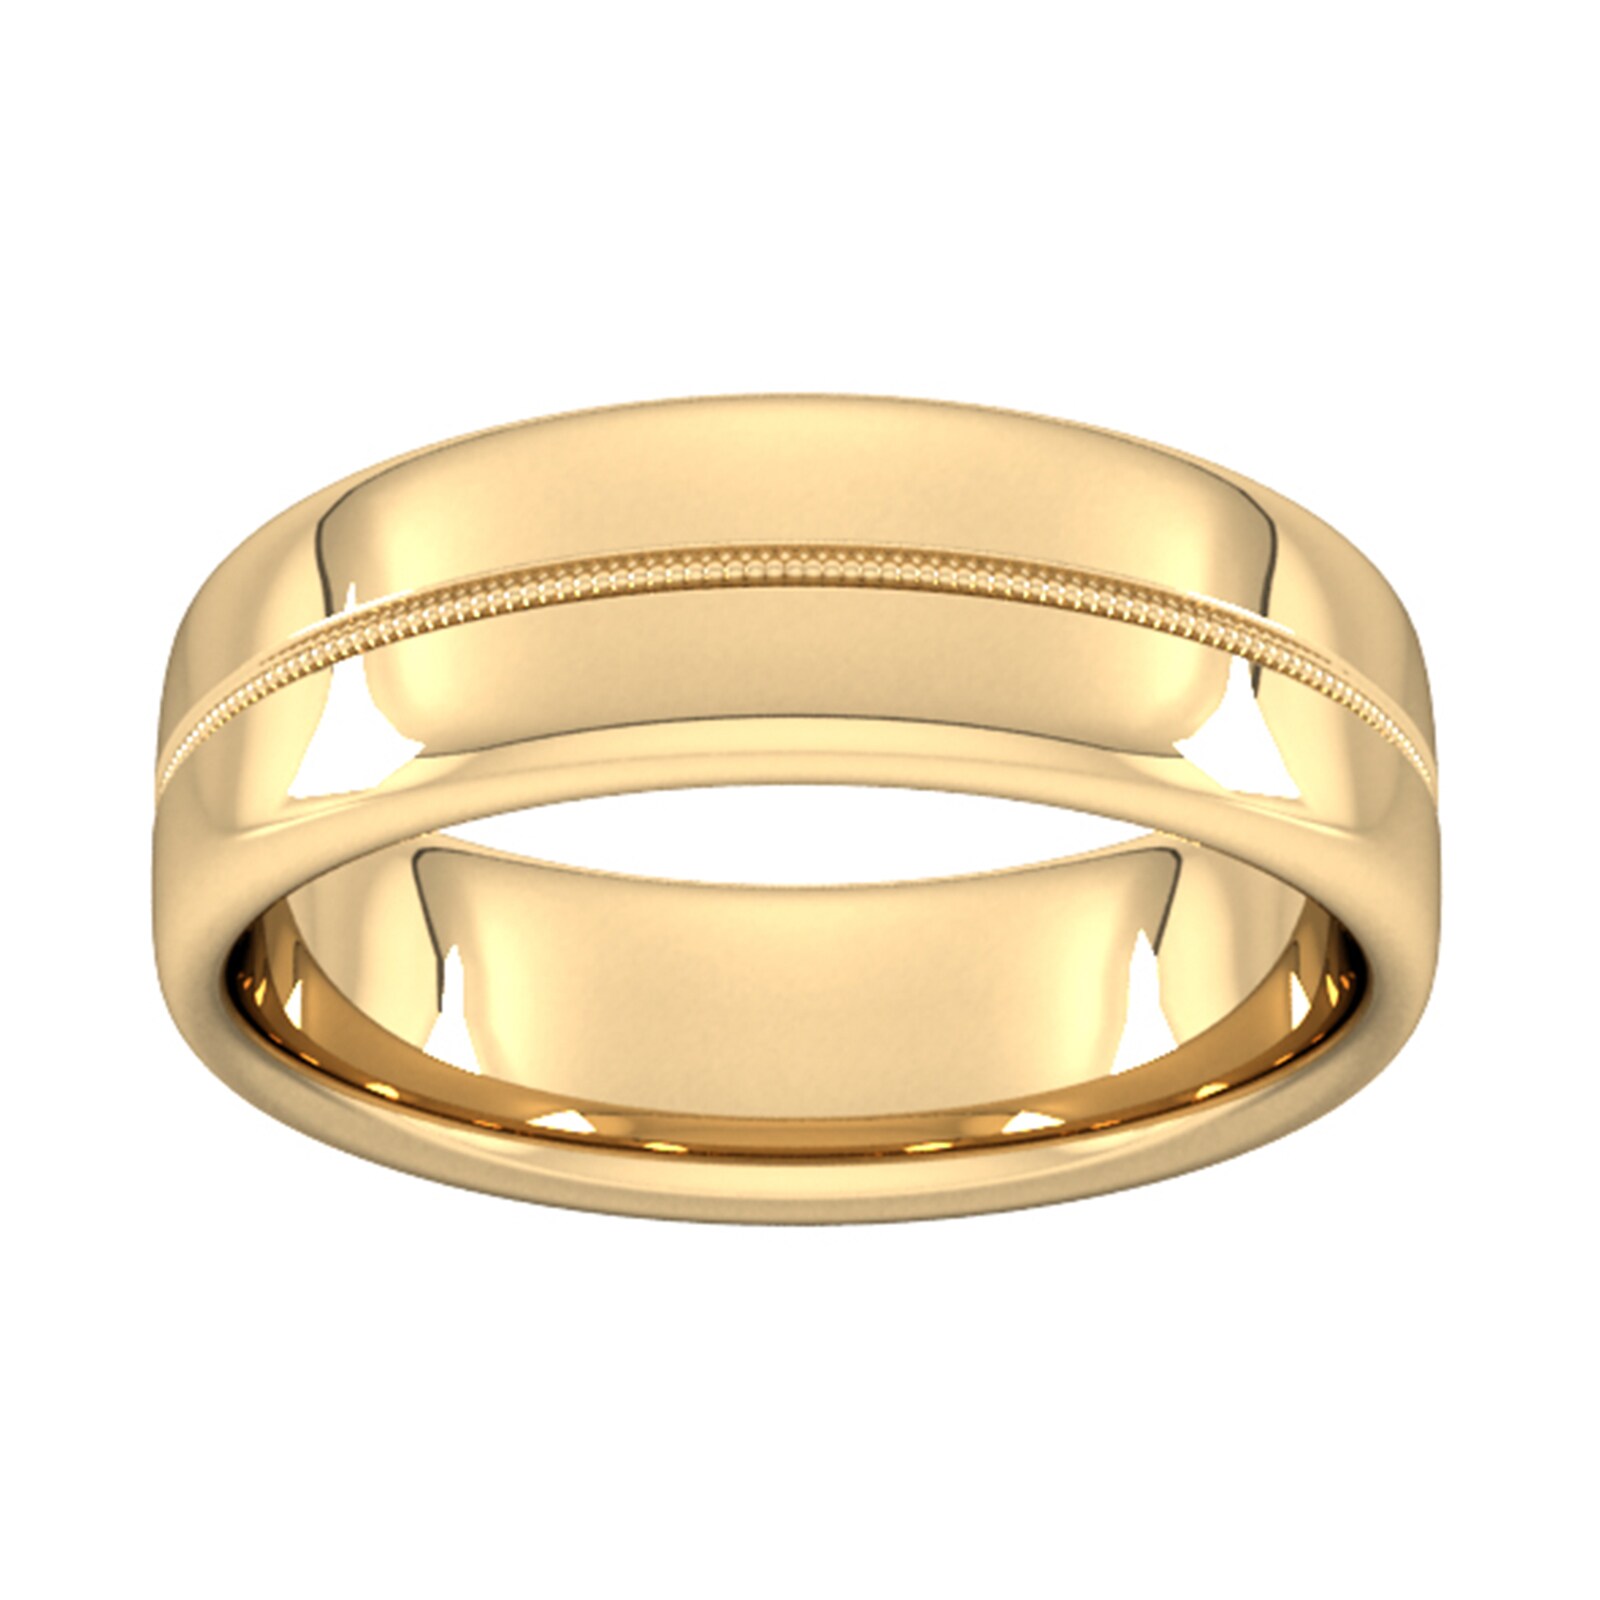 7mm Slight Court Extra Heavy Milgrain Centre Wedding Ring In 9 Carat Yellow Gold - Ring Size W